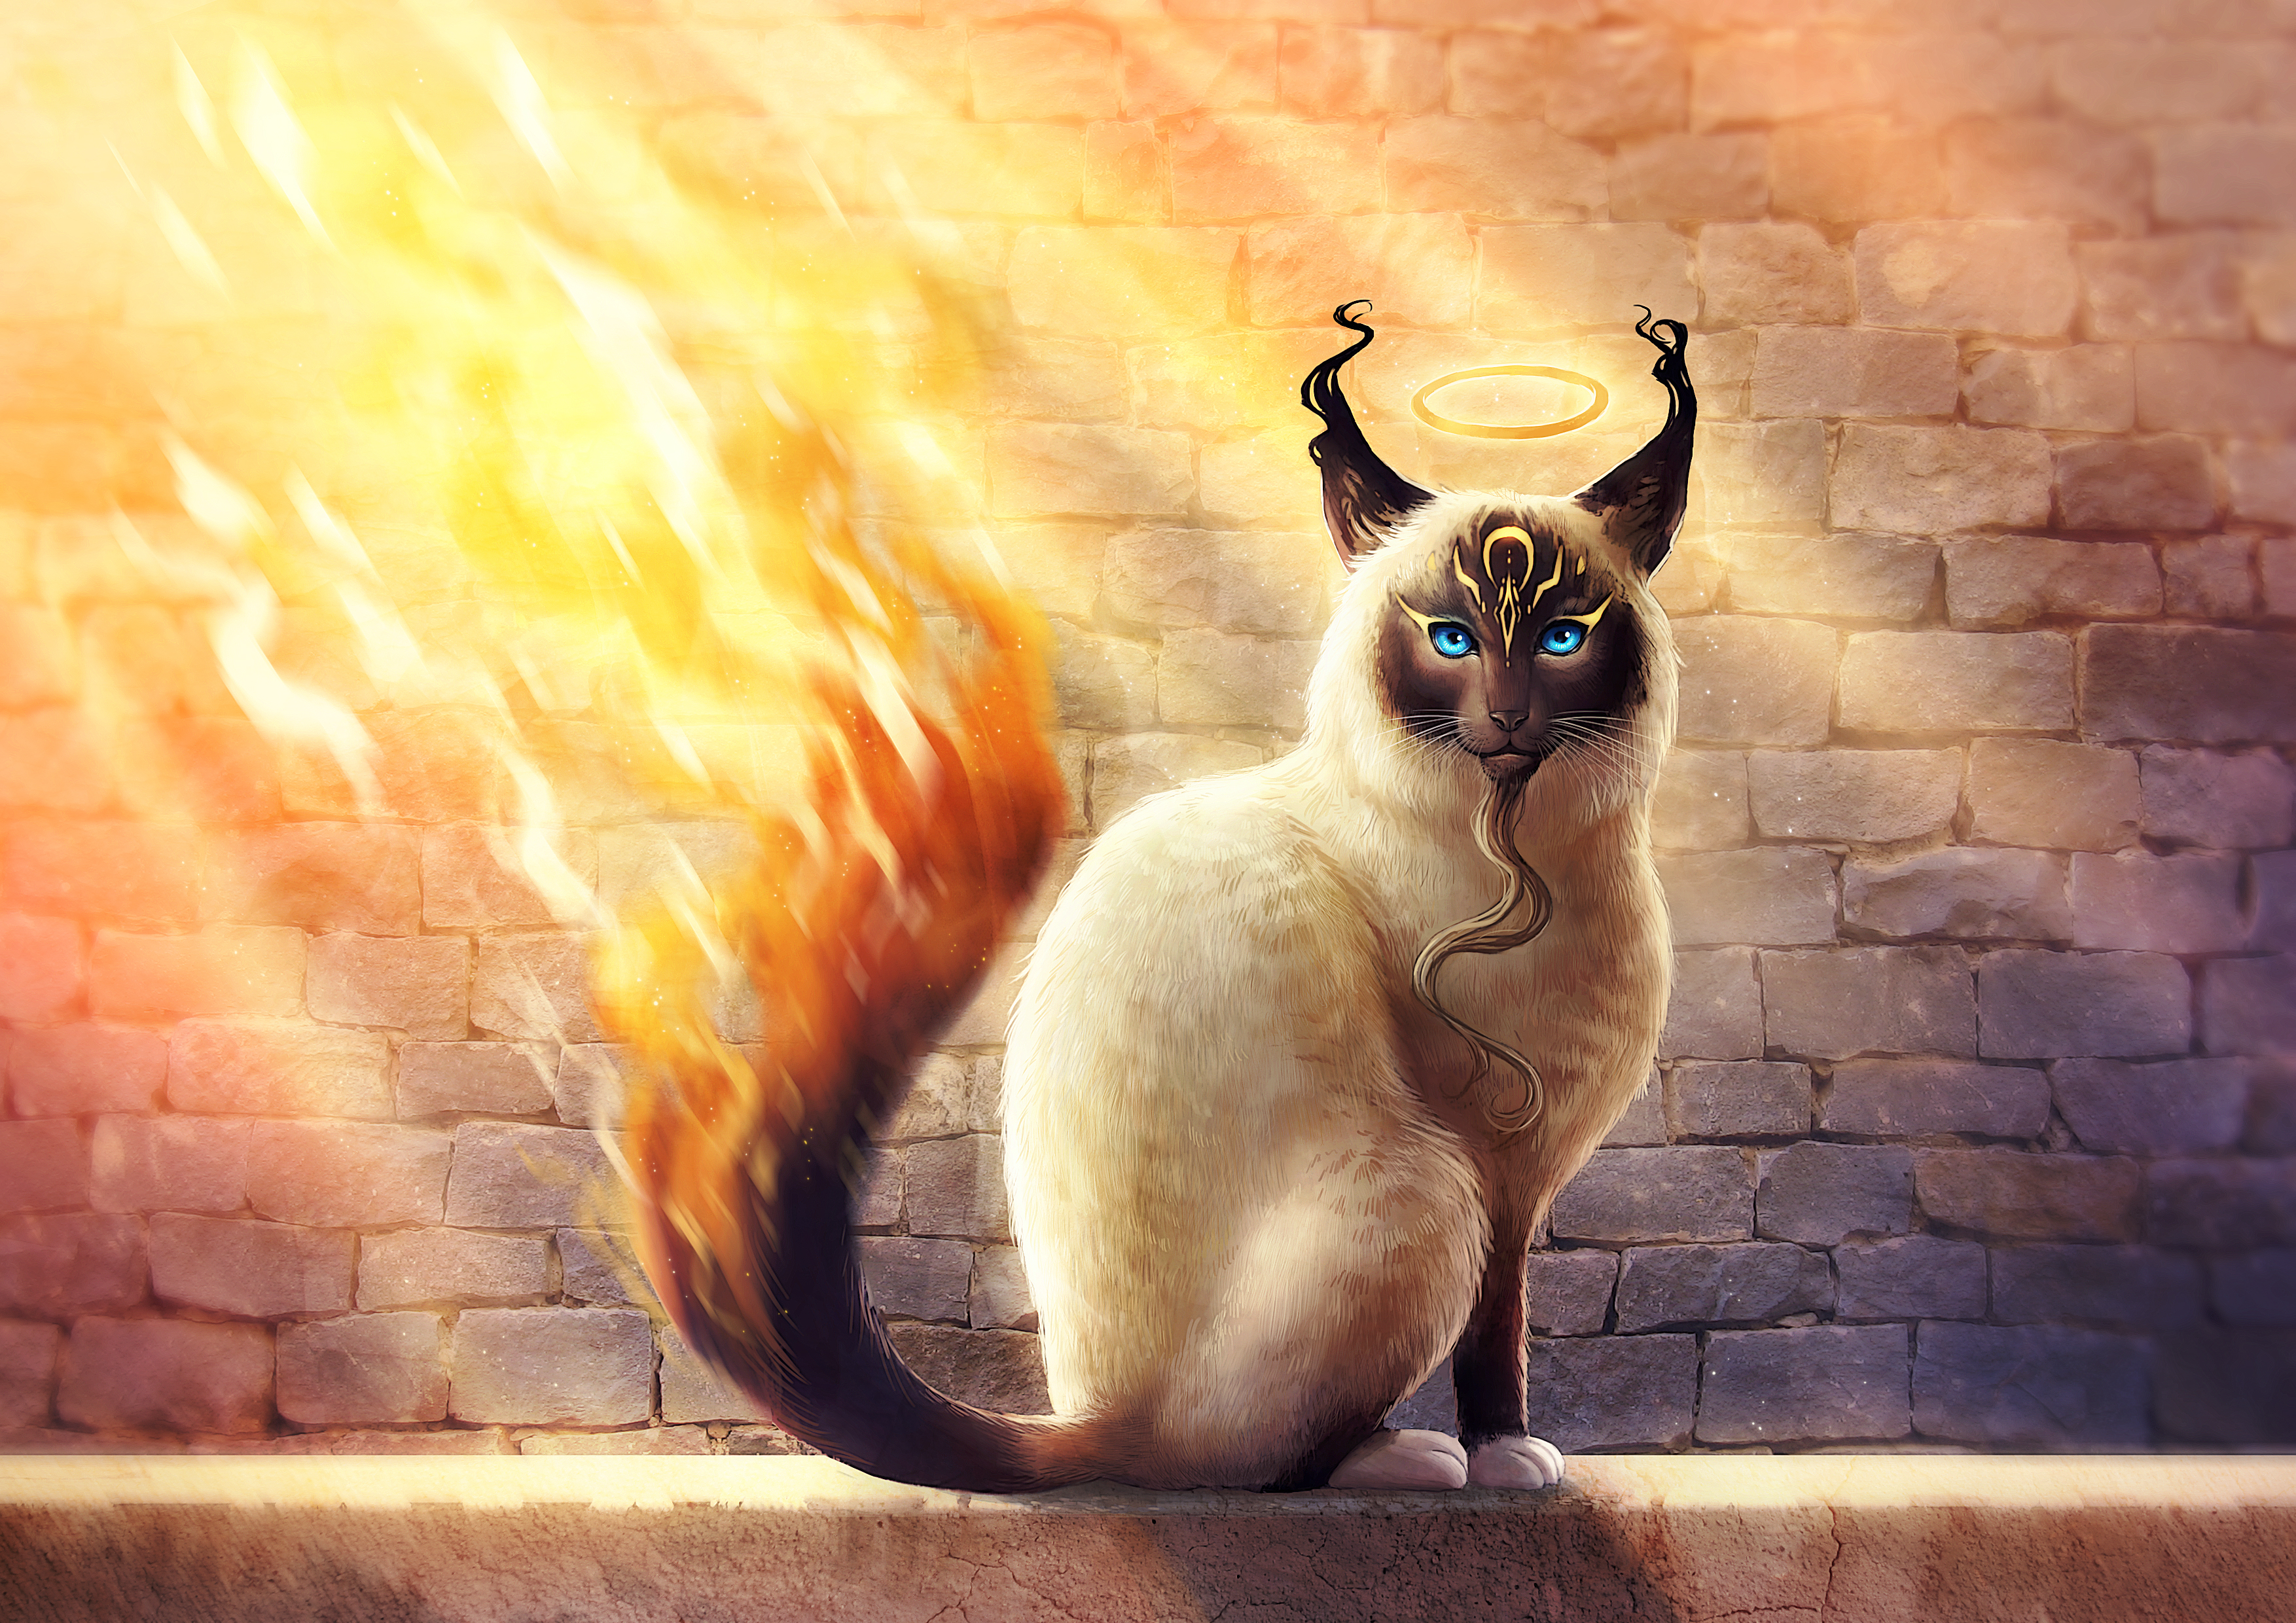 Wallpaper Magic cat with a fiery tail, fantasy.